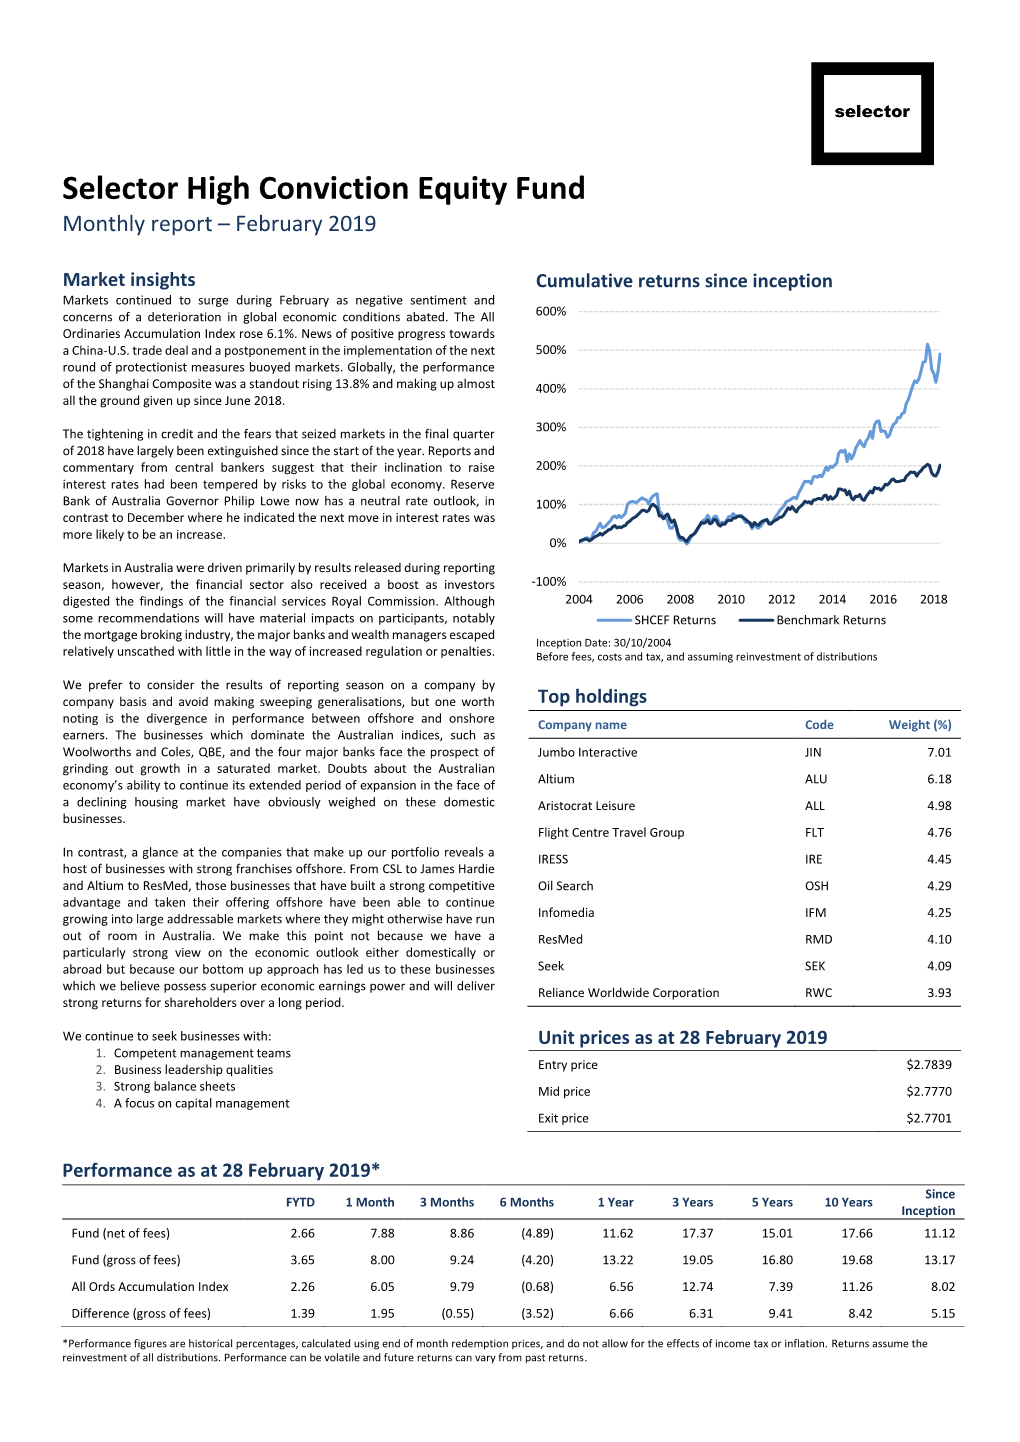 Selector High Conviction Equity Fund Monthly Report – February 2019